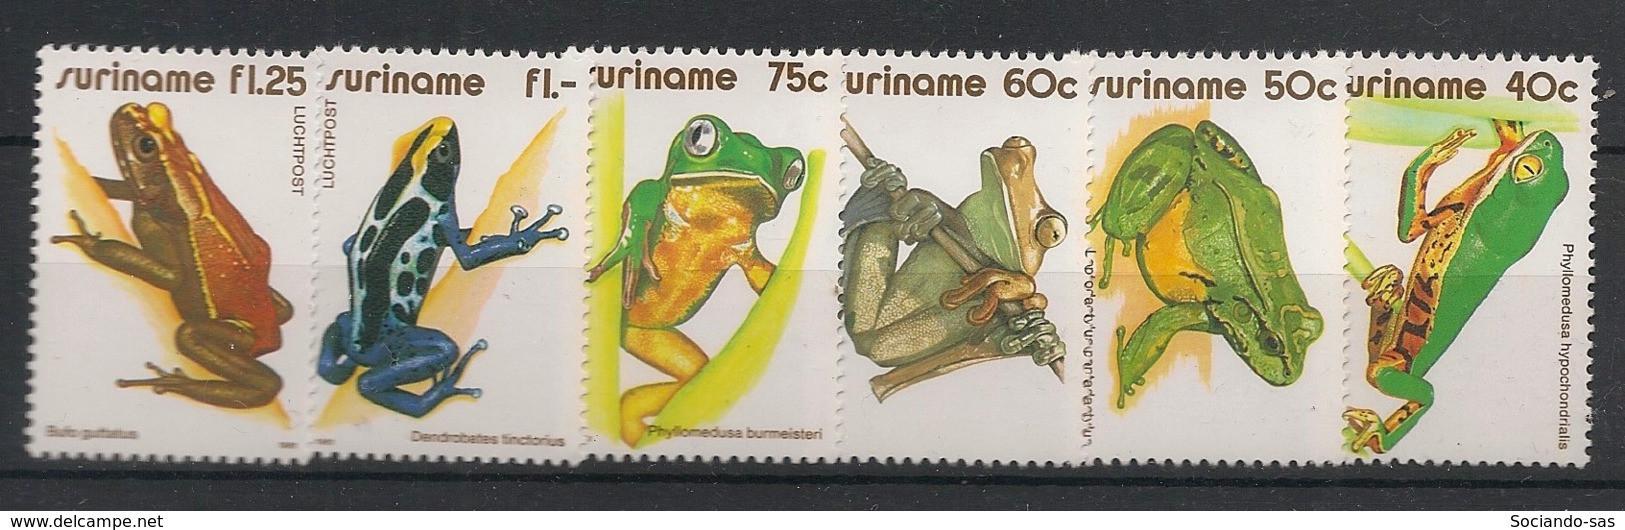 SURINAME - 1981 - N°YT. 823 à 825 + PA 88 à 90 - Frogs - Neuf Luxe ** / MNH / Postfrisch - Frogs